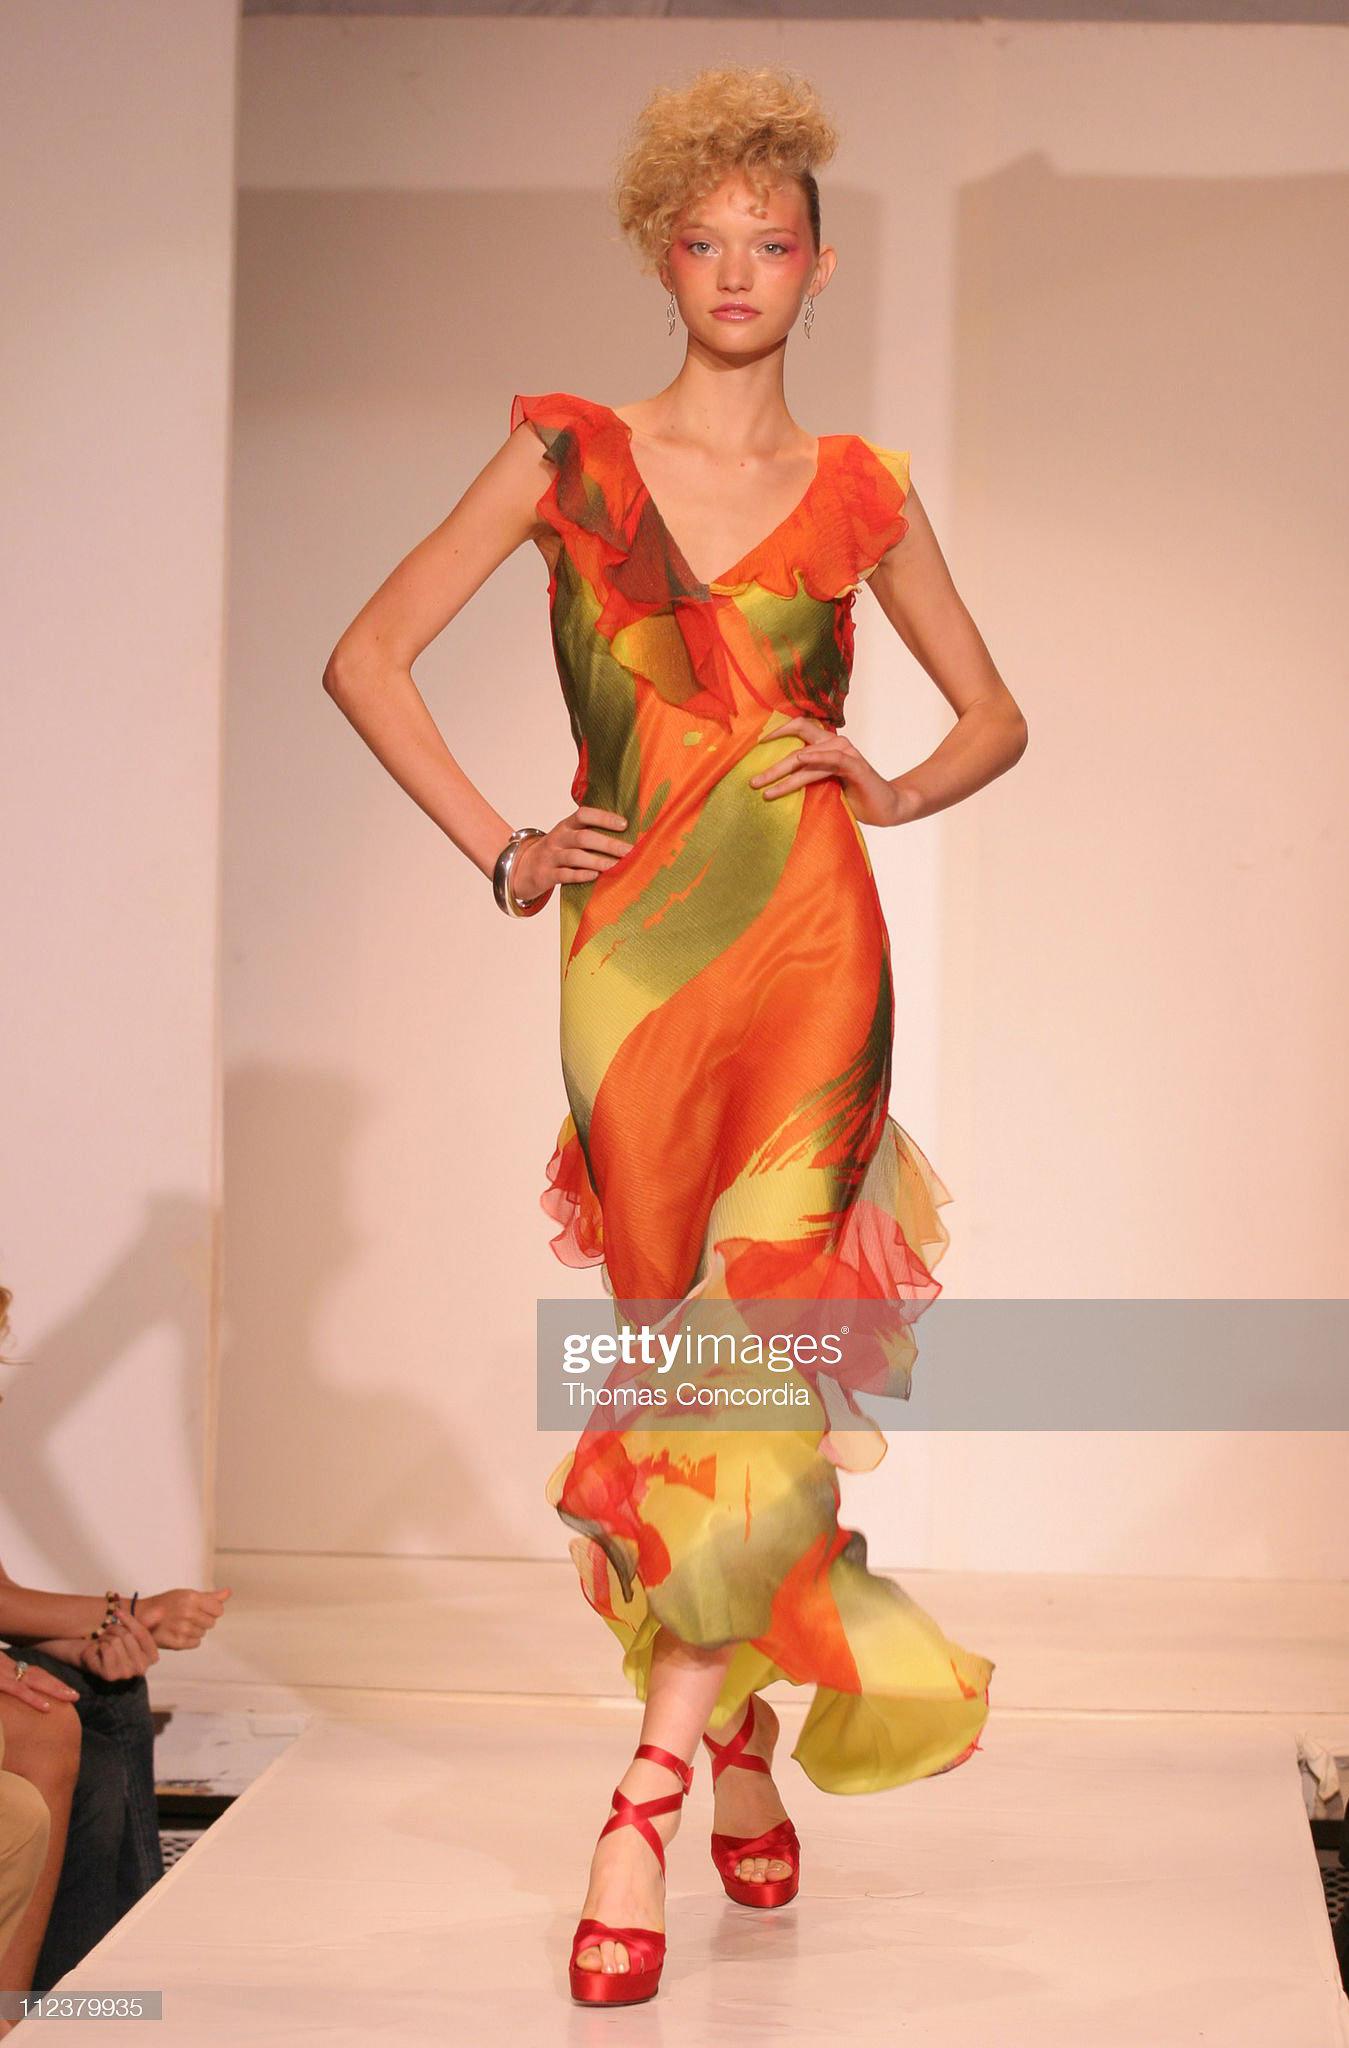 S/S 2005 Stephen Burrows bias cut abstract print gown with ruffle bust and hem. Bright red-orange, olive greens, and yellow hues in abstract, painterly pattern throughout. Semi-sheer, subtle metallic chiffon gown with yellow-green silk slip dress